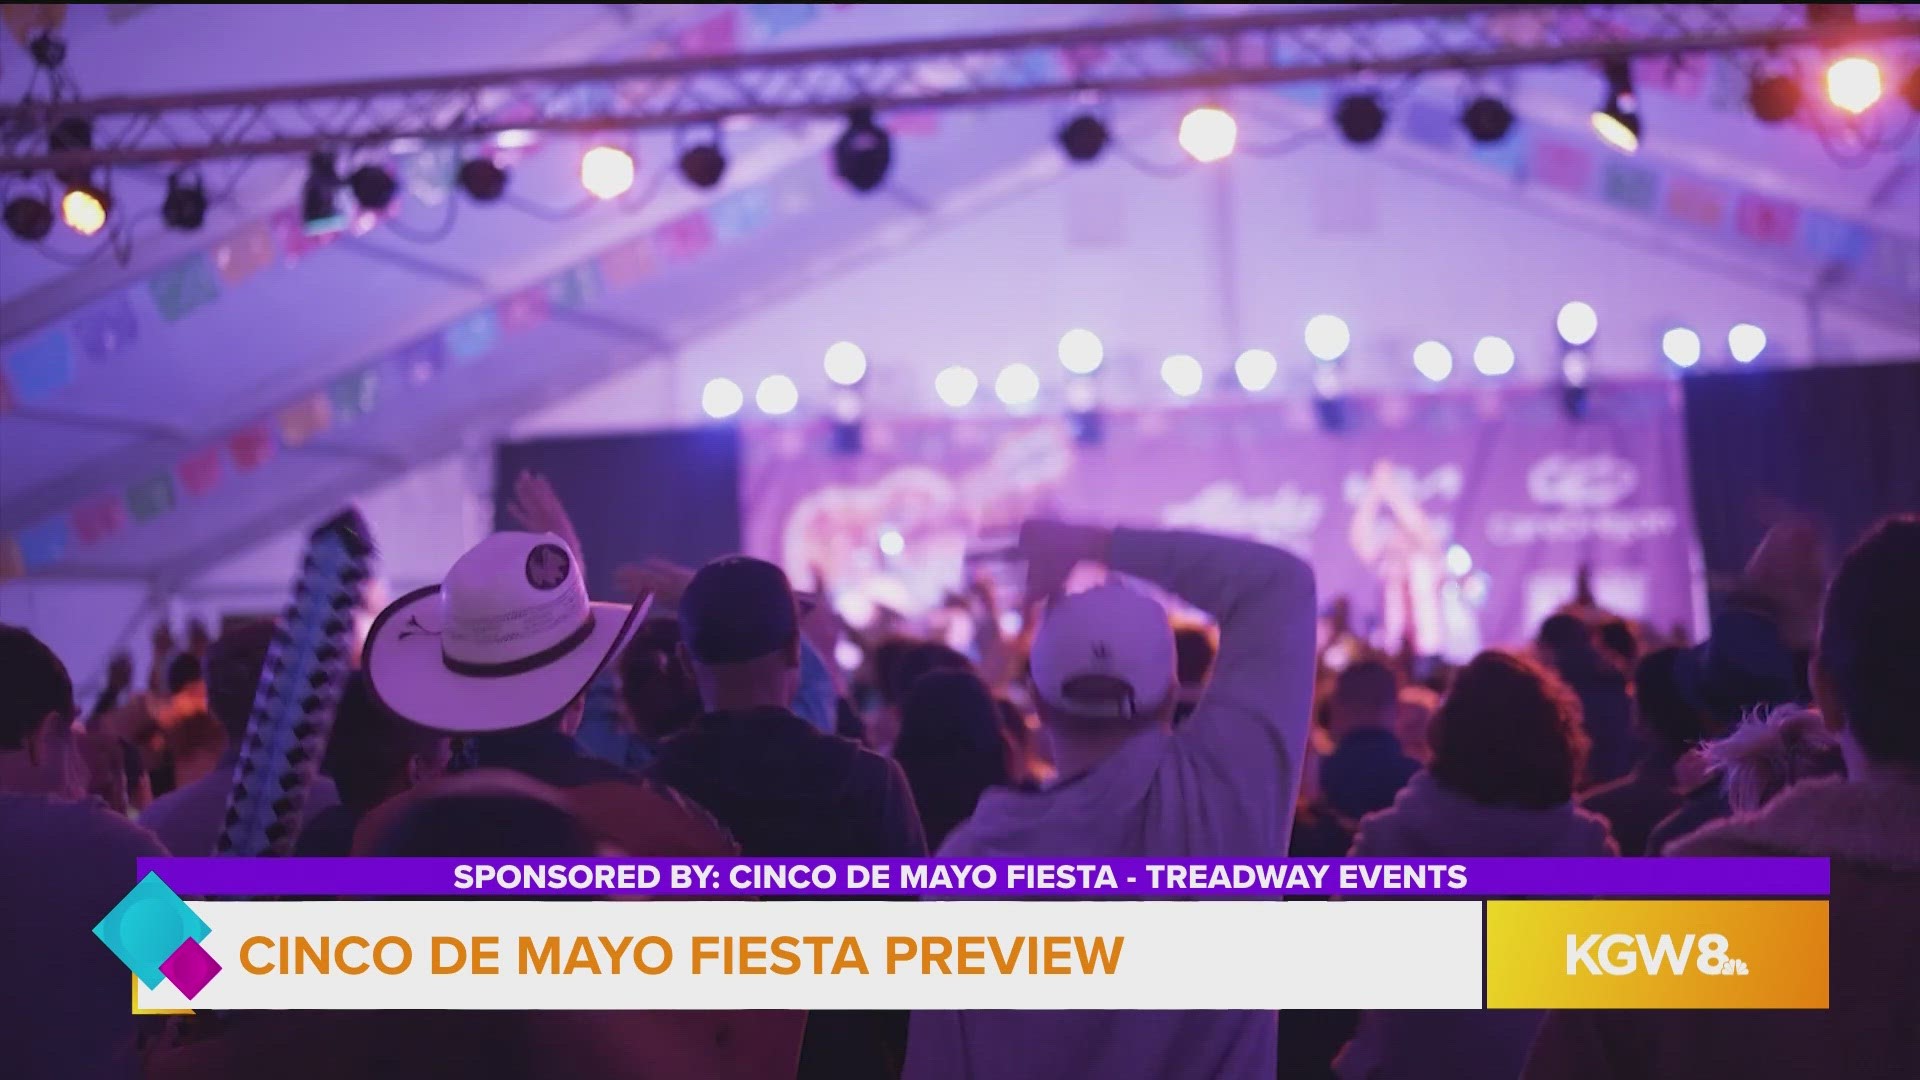 This segment is sponsored by Cinco de Mayo Fiesta - Treadway Events